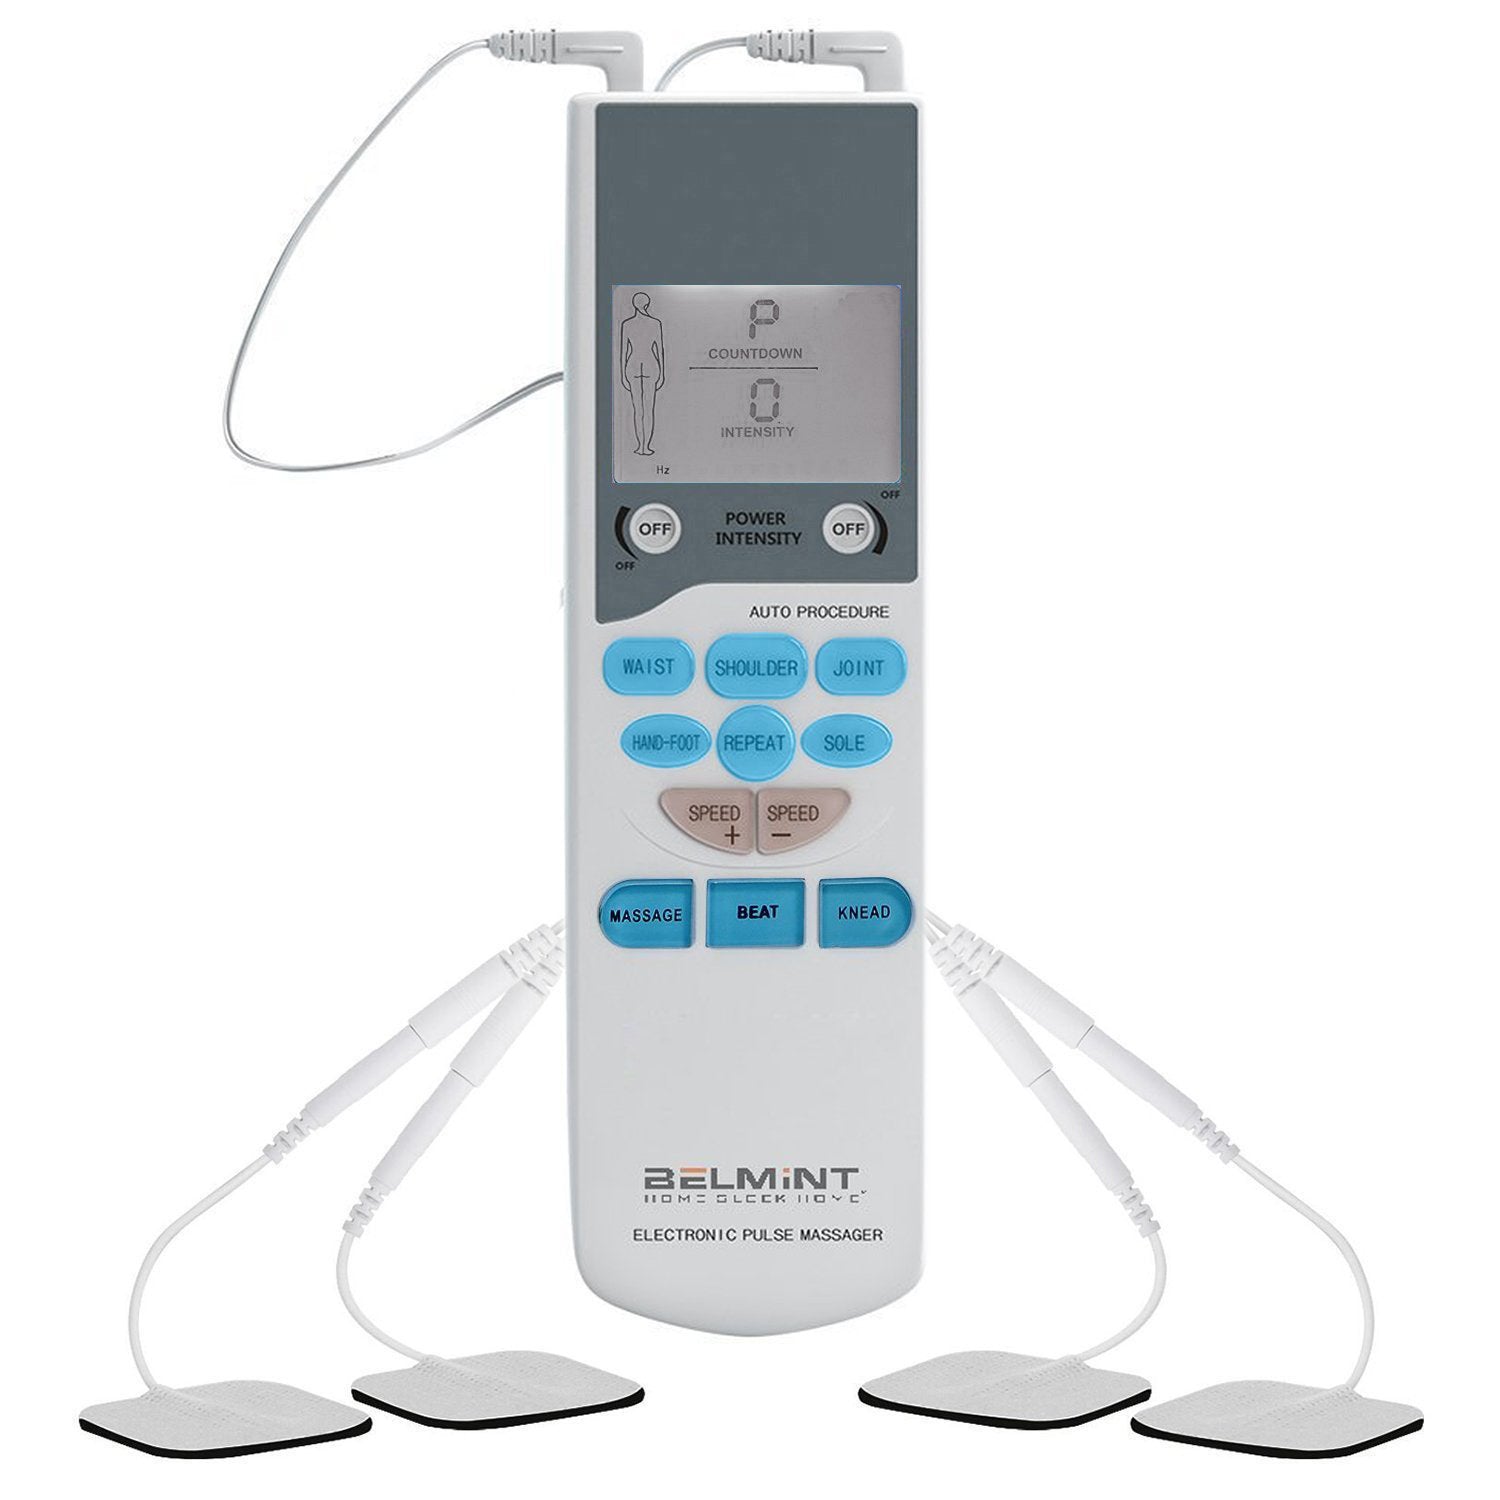 Intensity at Home TENS Unit Muscle Stimulator - Electric Pulse